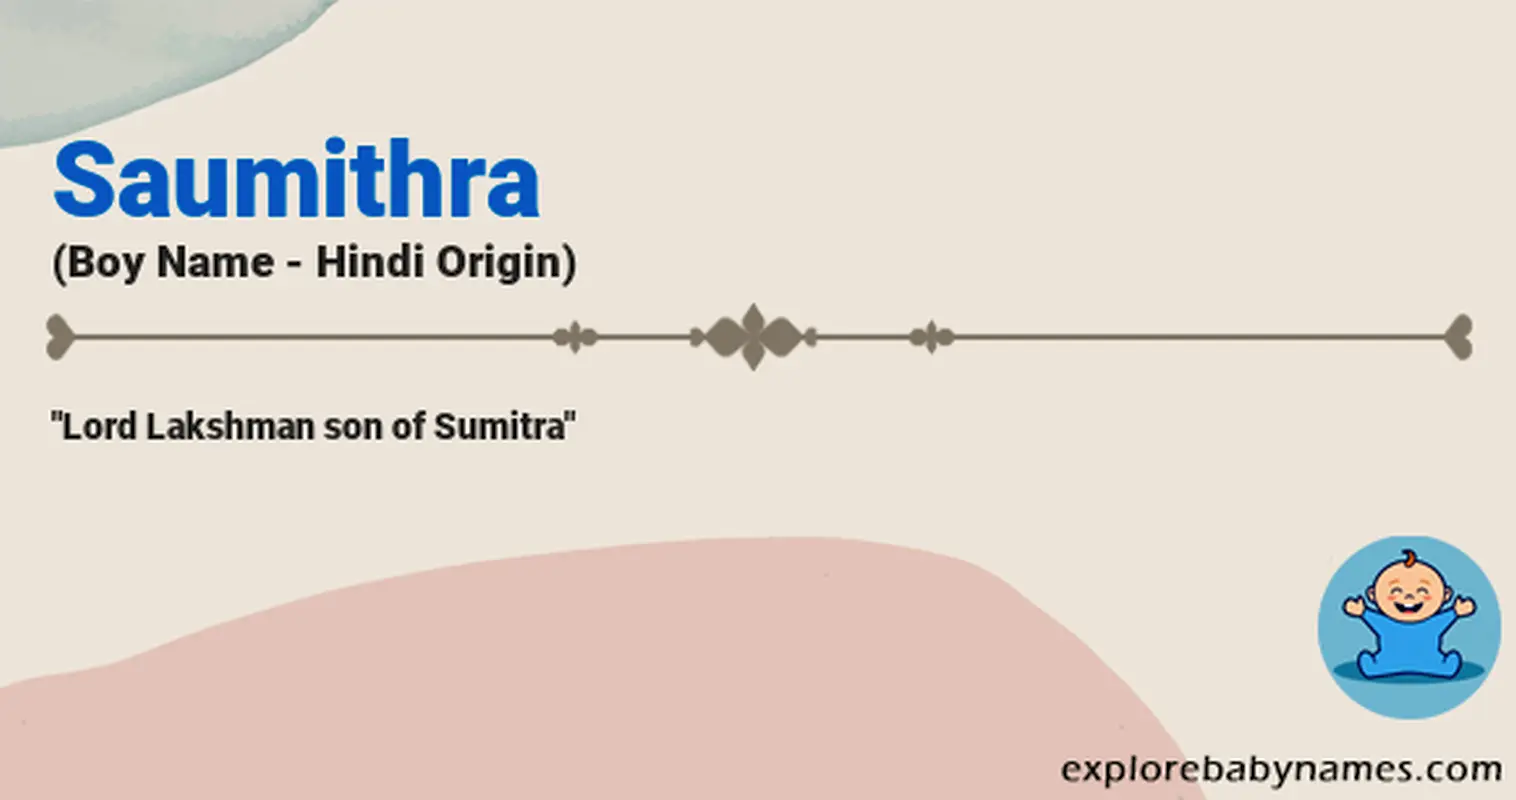 Meaning of Saumithra